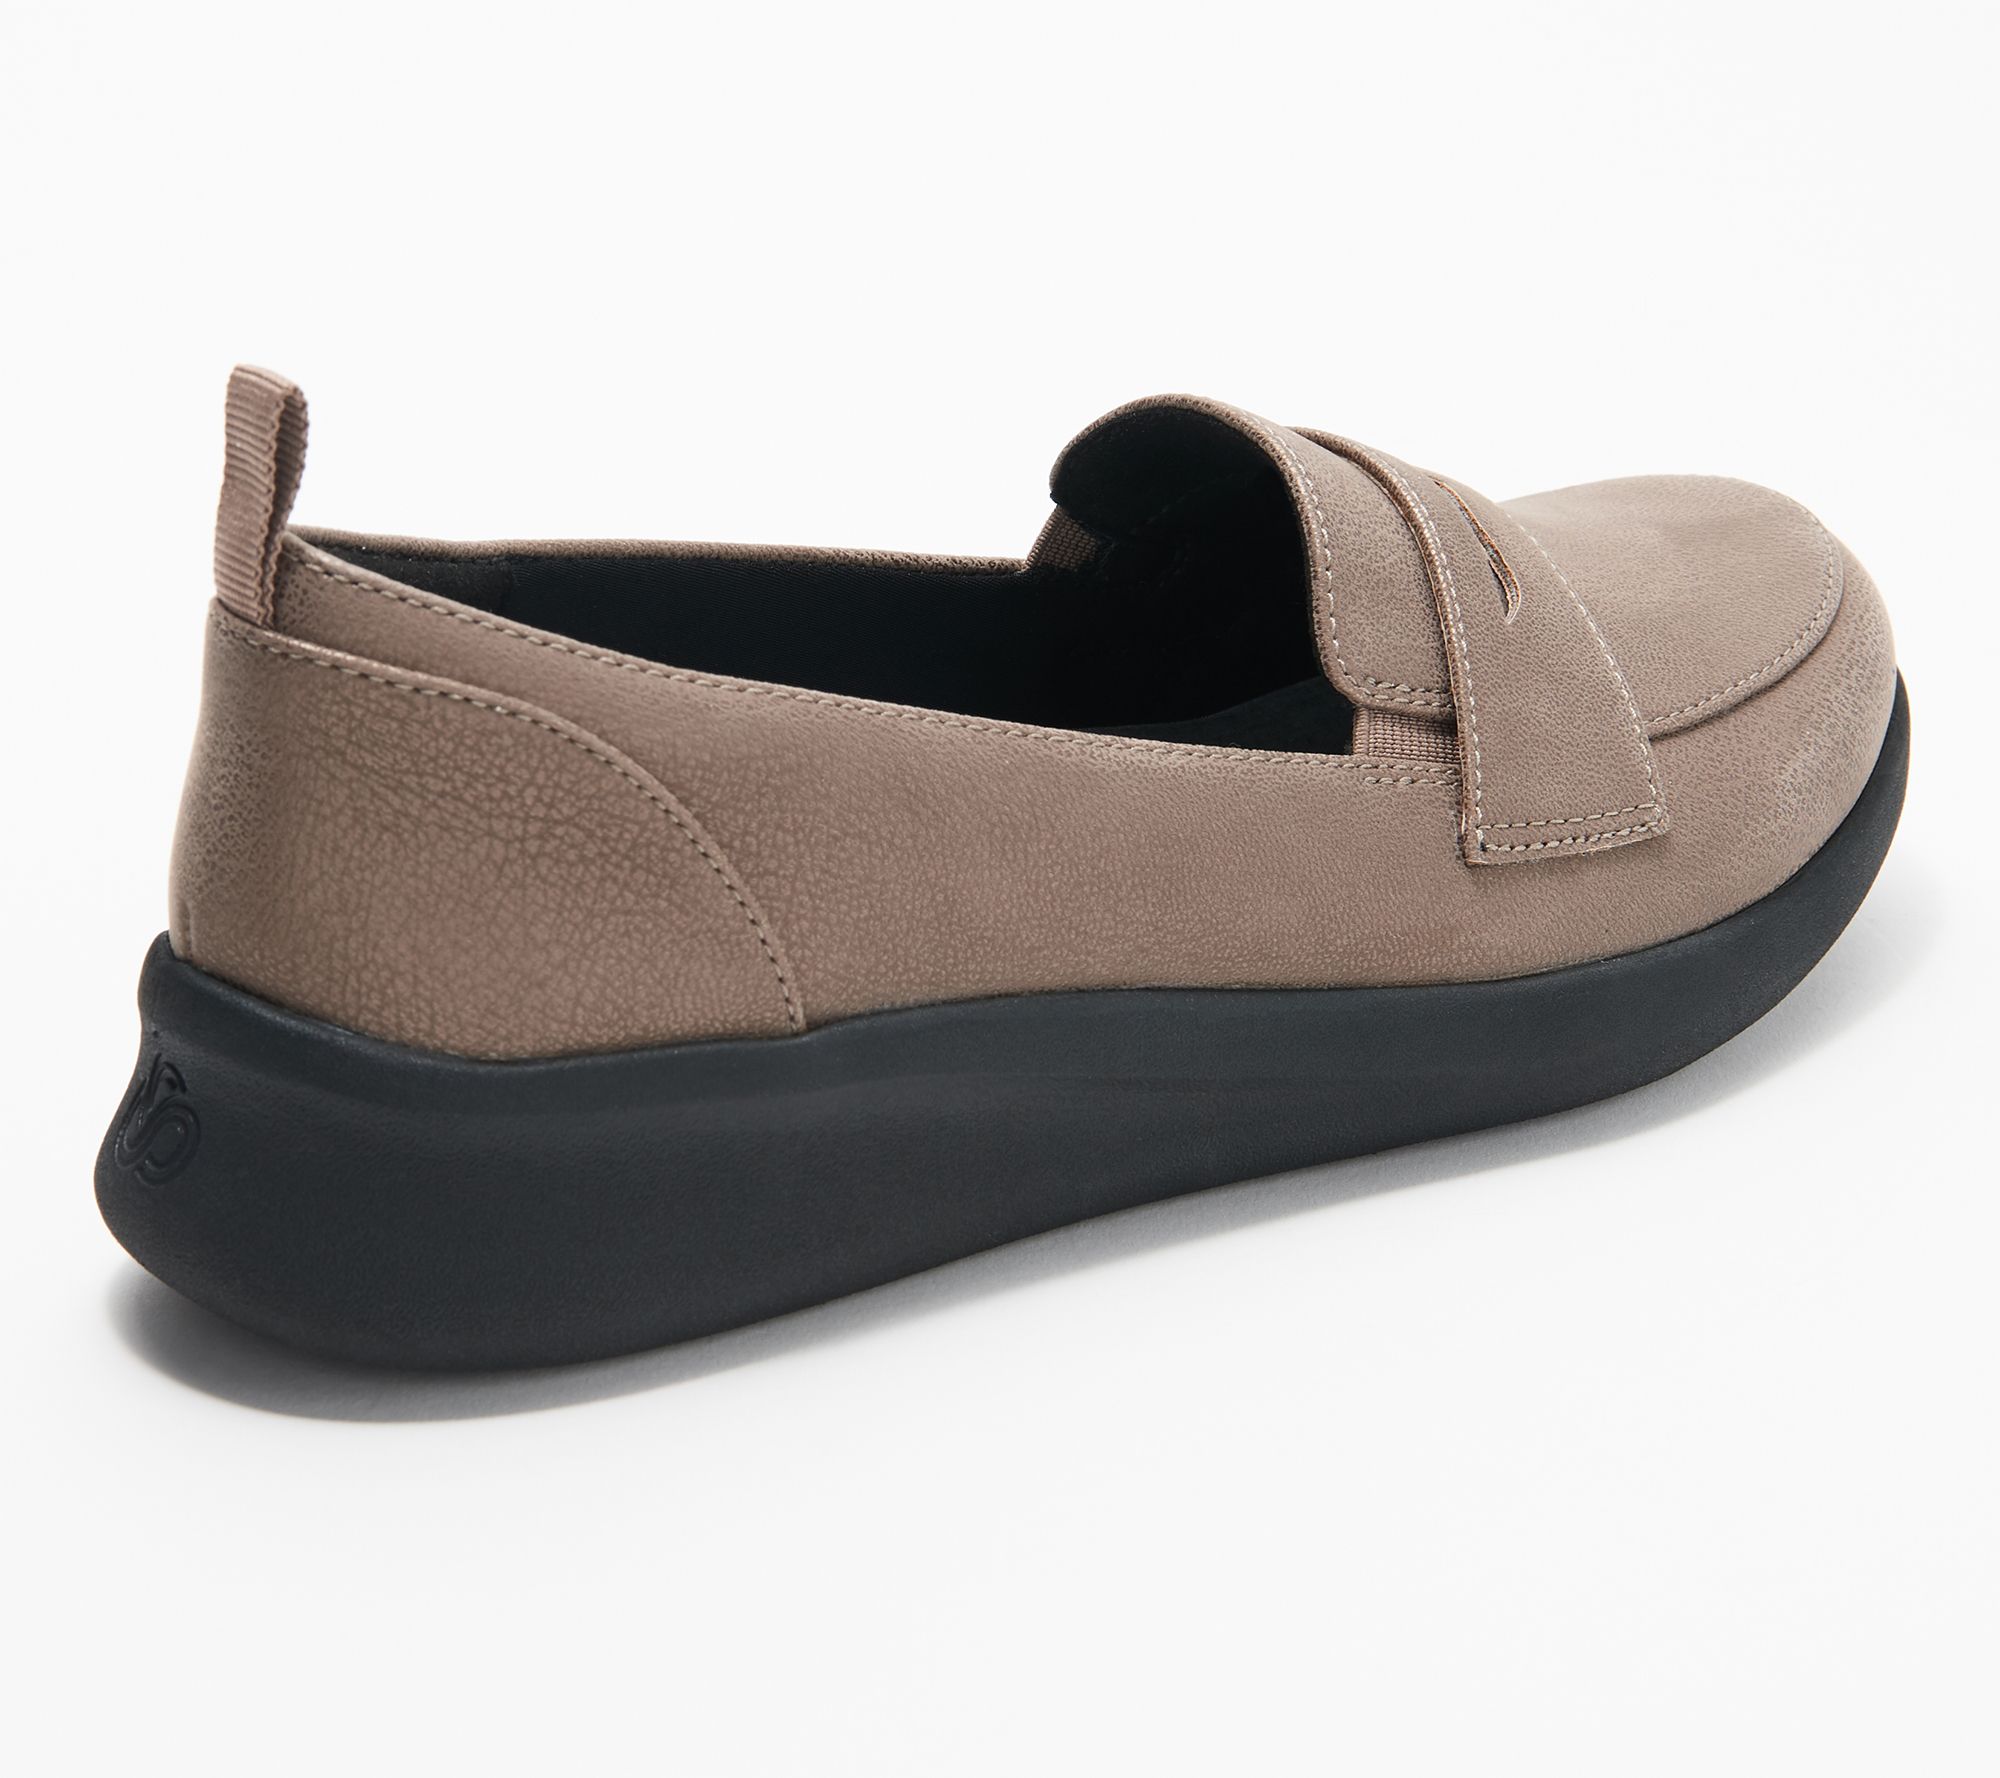 cloudsteppers by clarks loafers